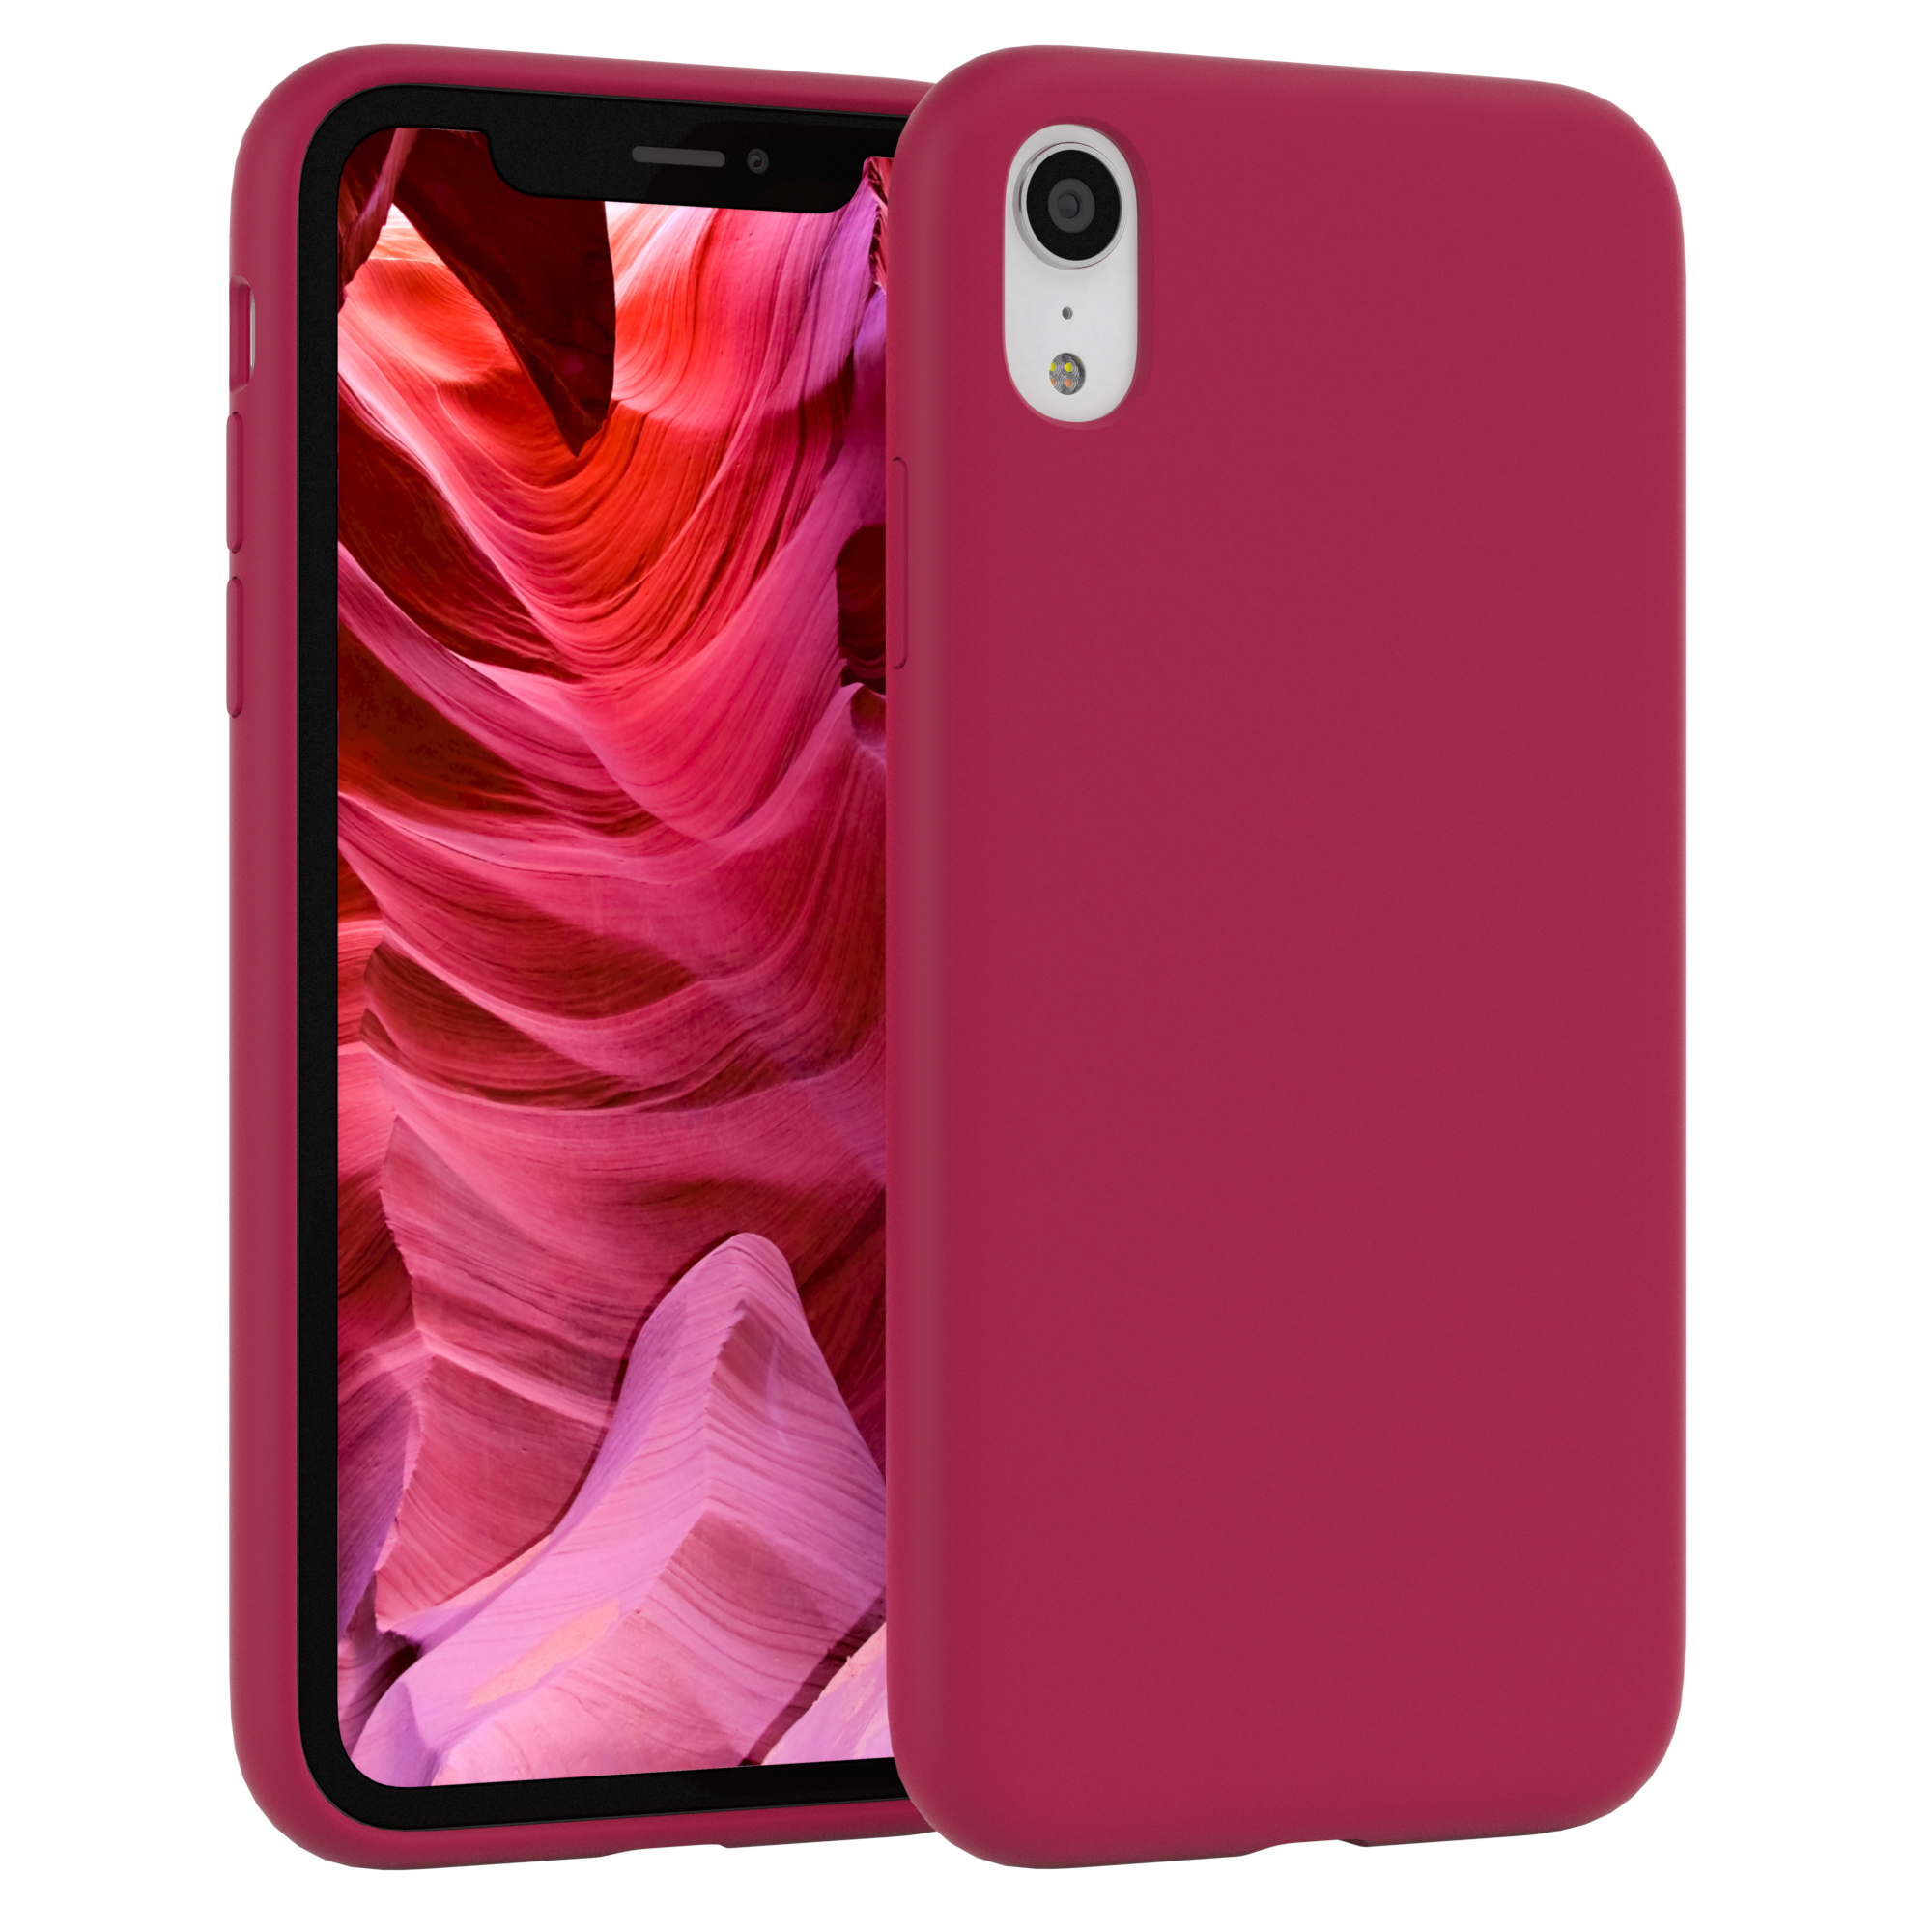 Backcover, Silikon EAZY / Apple, iPhone Handycase, CASE Premium XR, Rot Beere